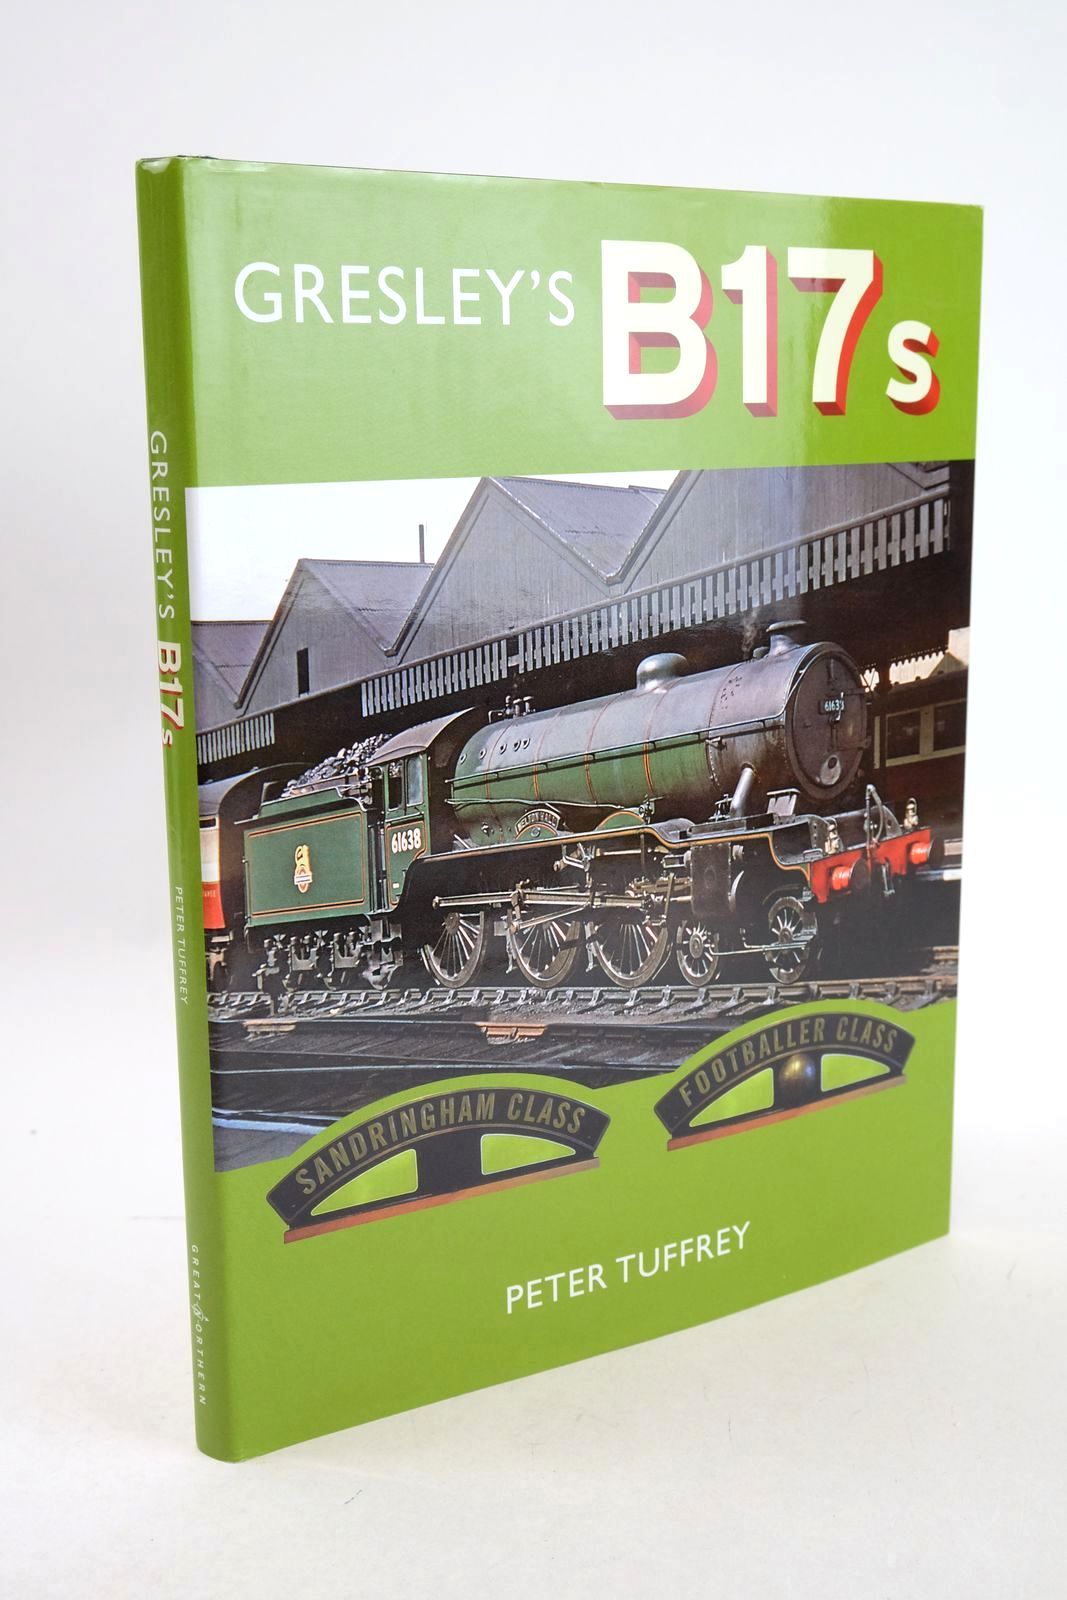 Photo of GRESLEY'S B17S written by Tuffrey, Peter published by Great Northern Books (STOCK CODE: 1327017)  for sale by Stella & Rose's Books